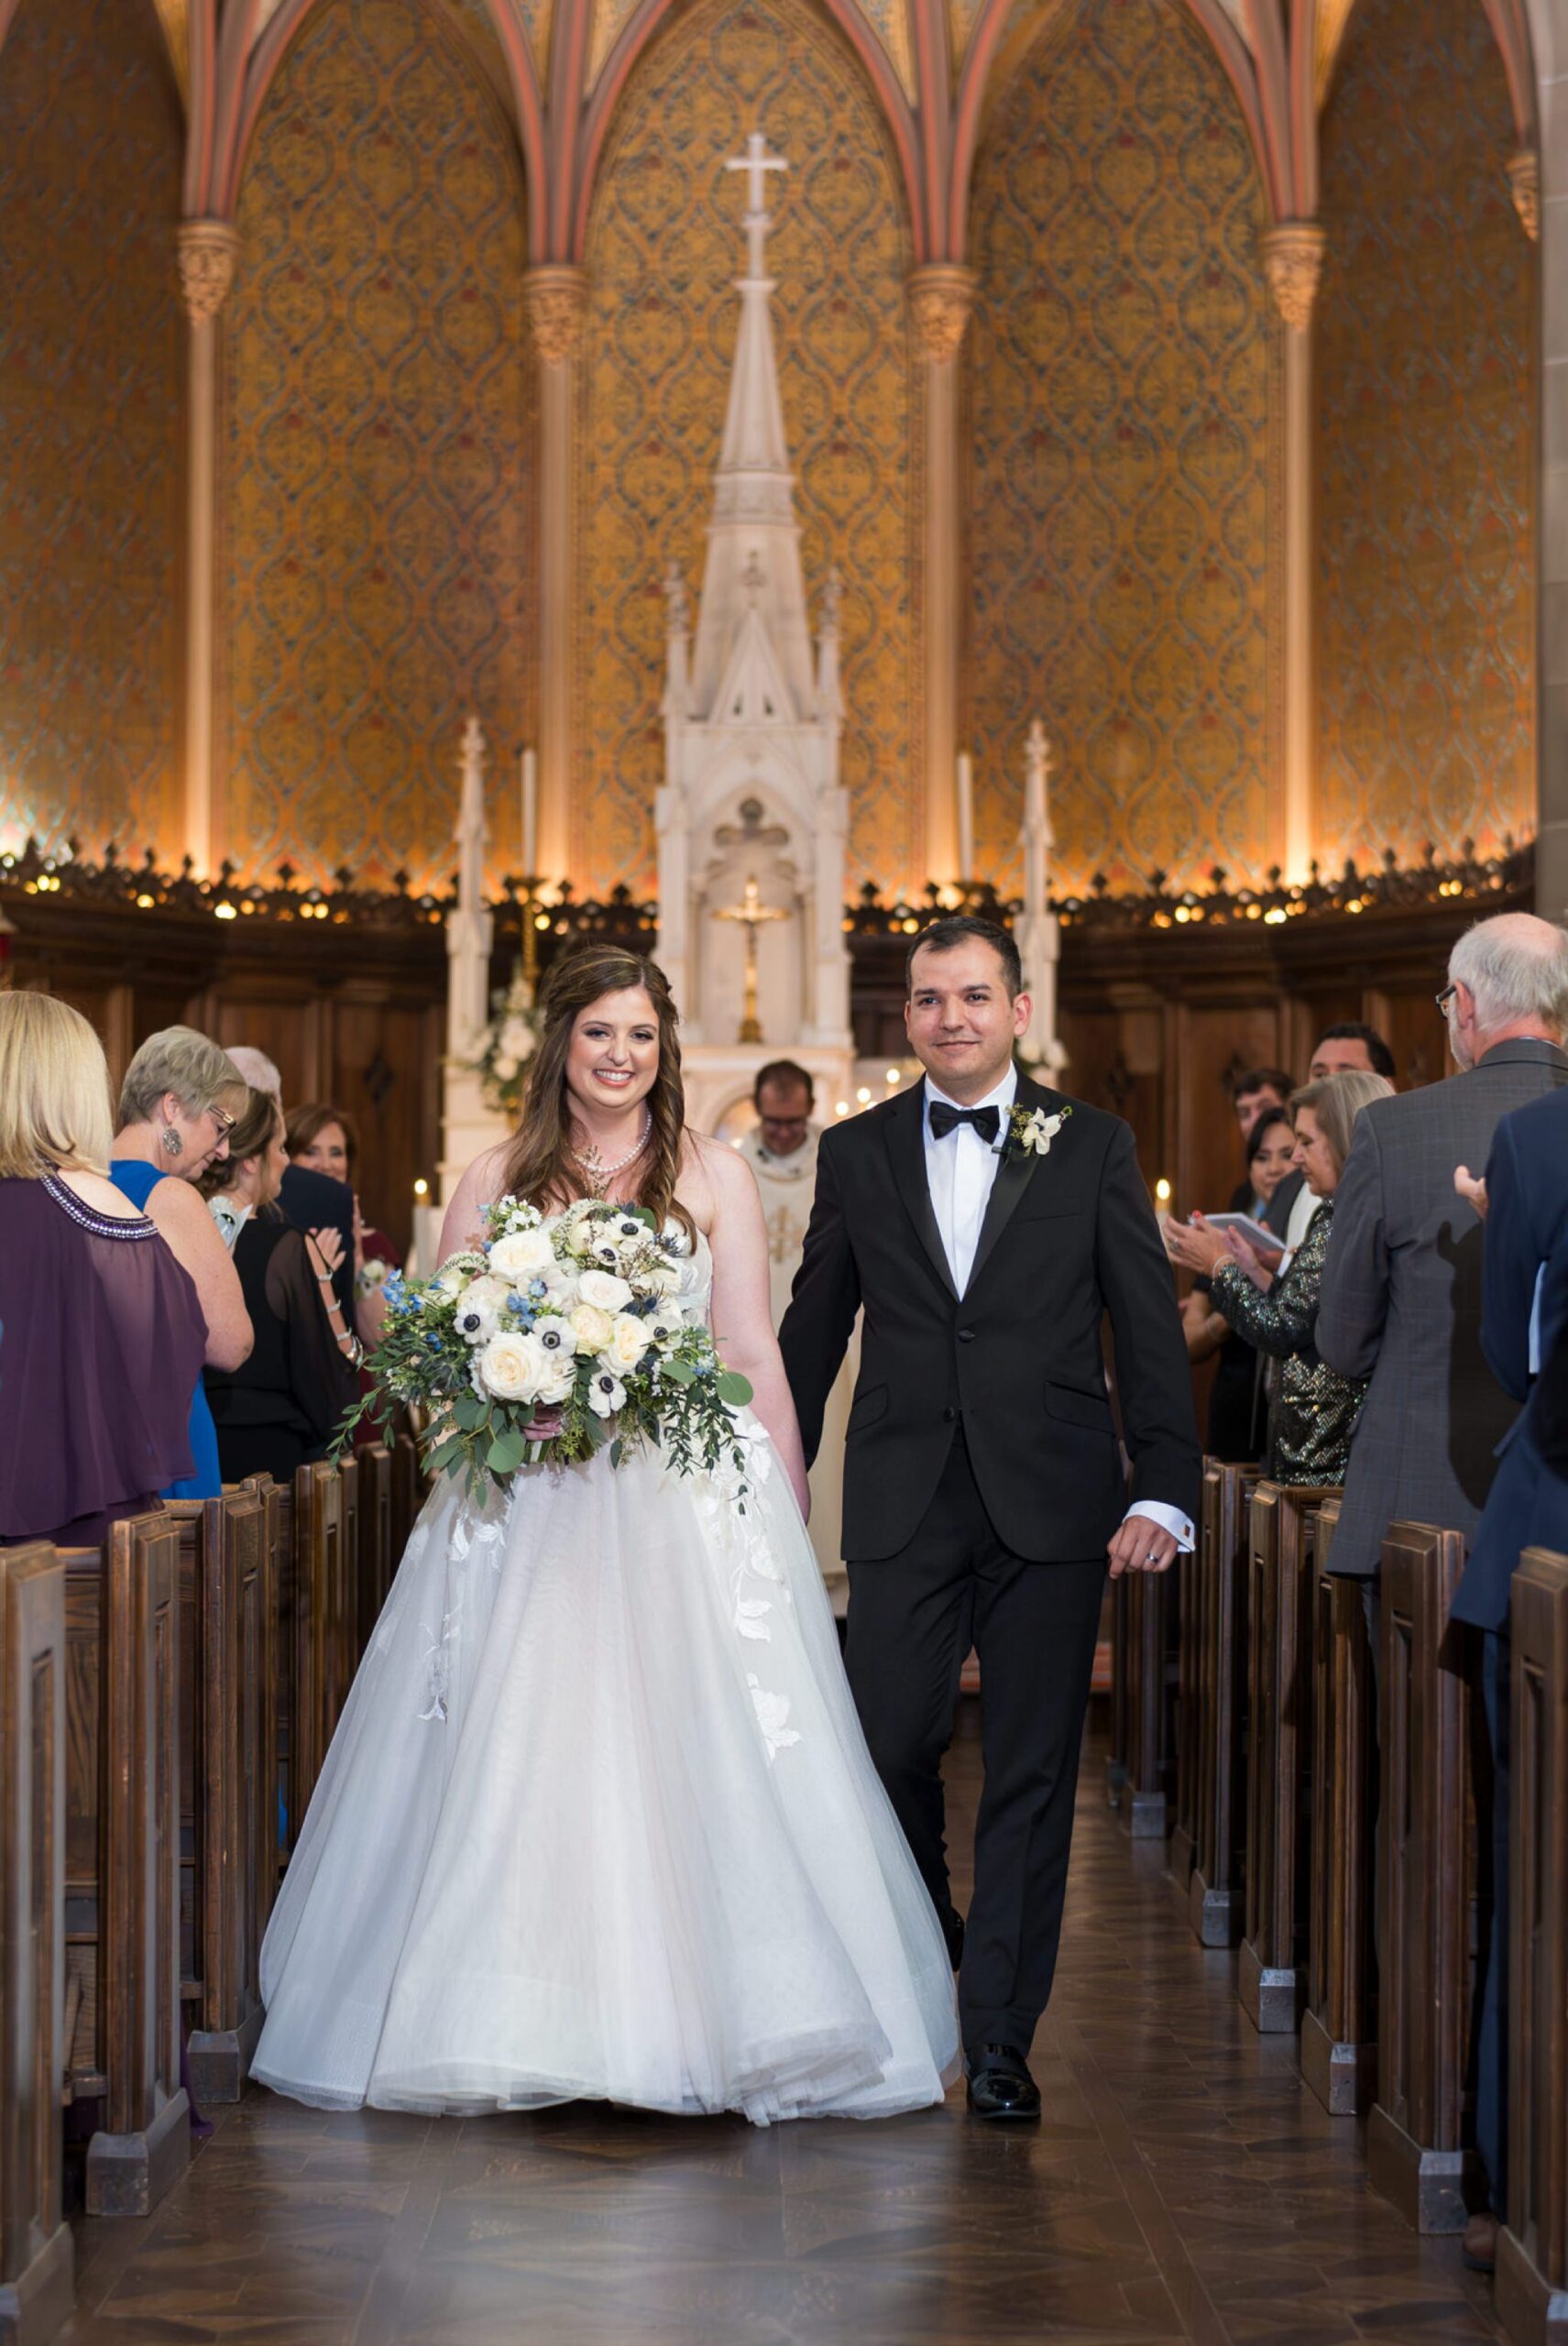 A bride and groom walk down the aisle at their Grosse Pointe Academy wedding.  